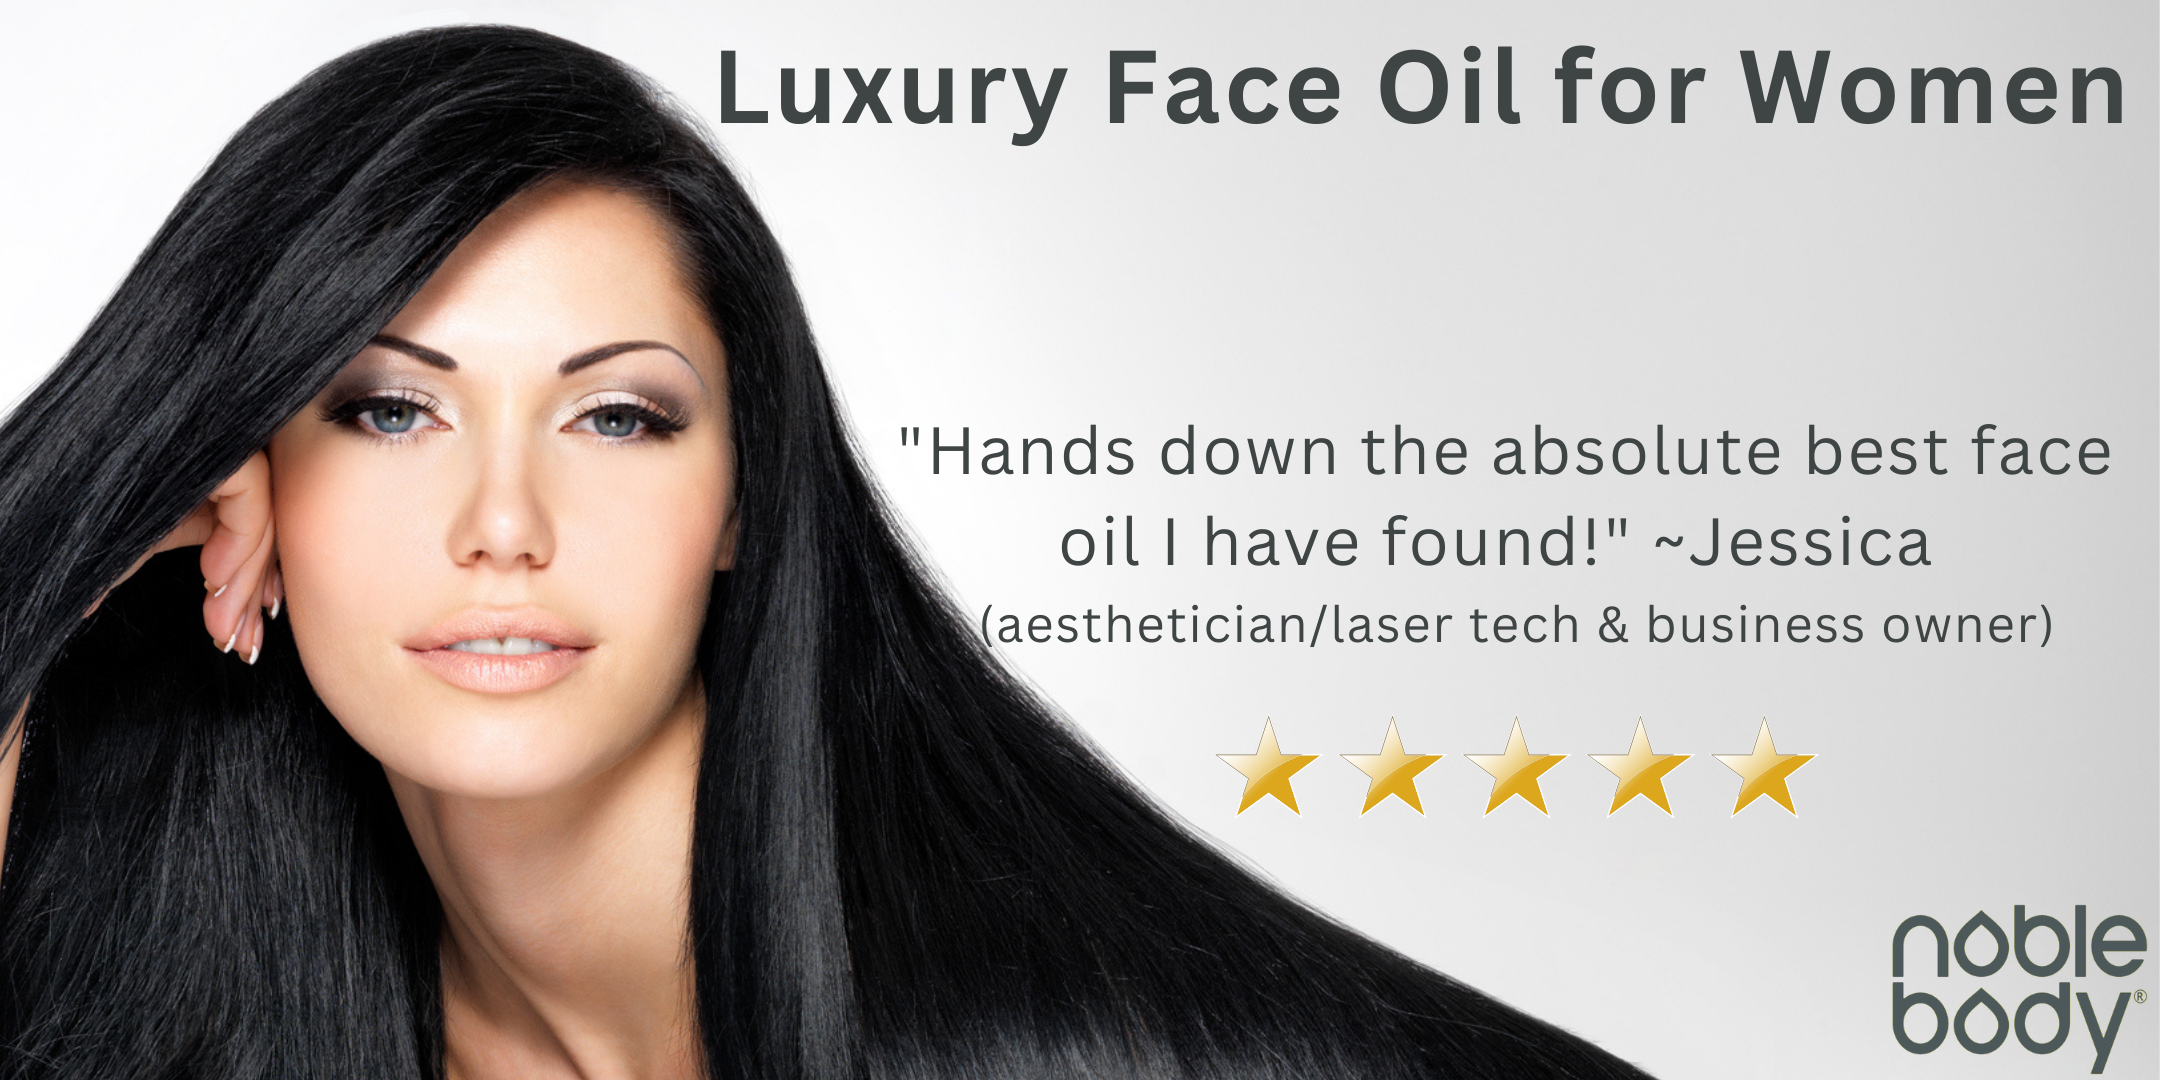 Closeup of a beautiful woman on left side of photo with long jet black hair looking at camera. On right text reads "luxury face oil for women, hands down the absolute best face oil I have found."